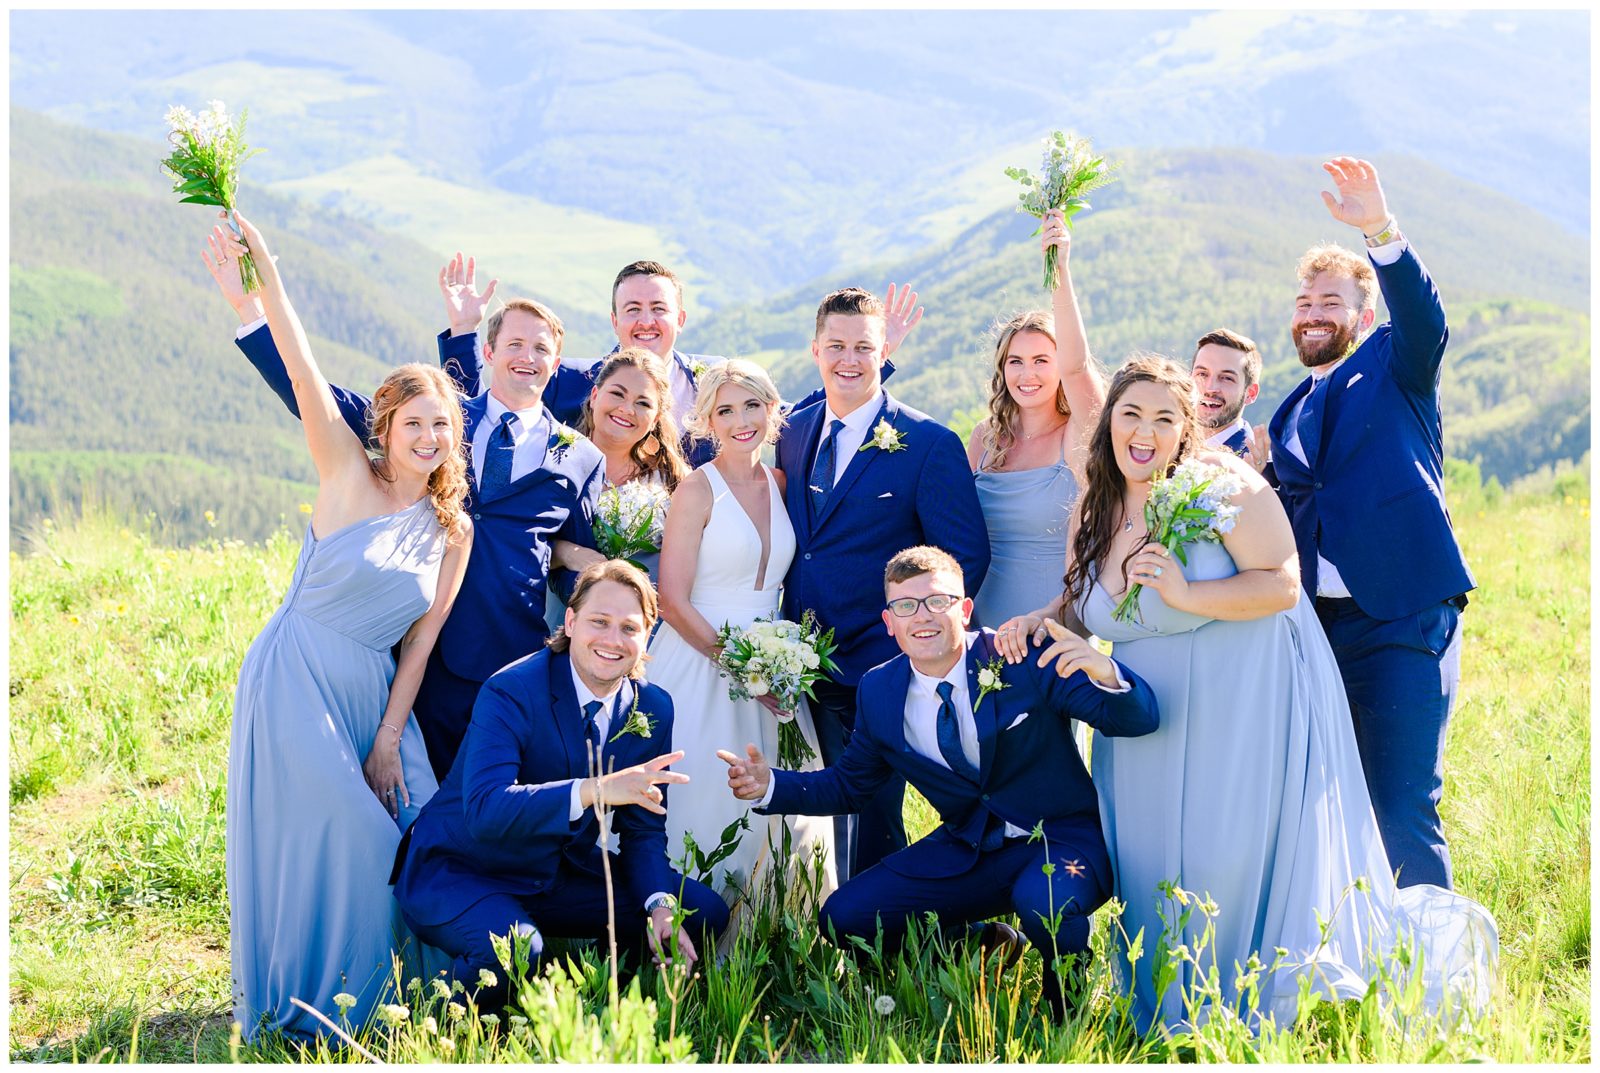 Wedding Party in Blue at Vail Wedding Deck